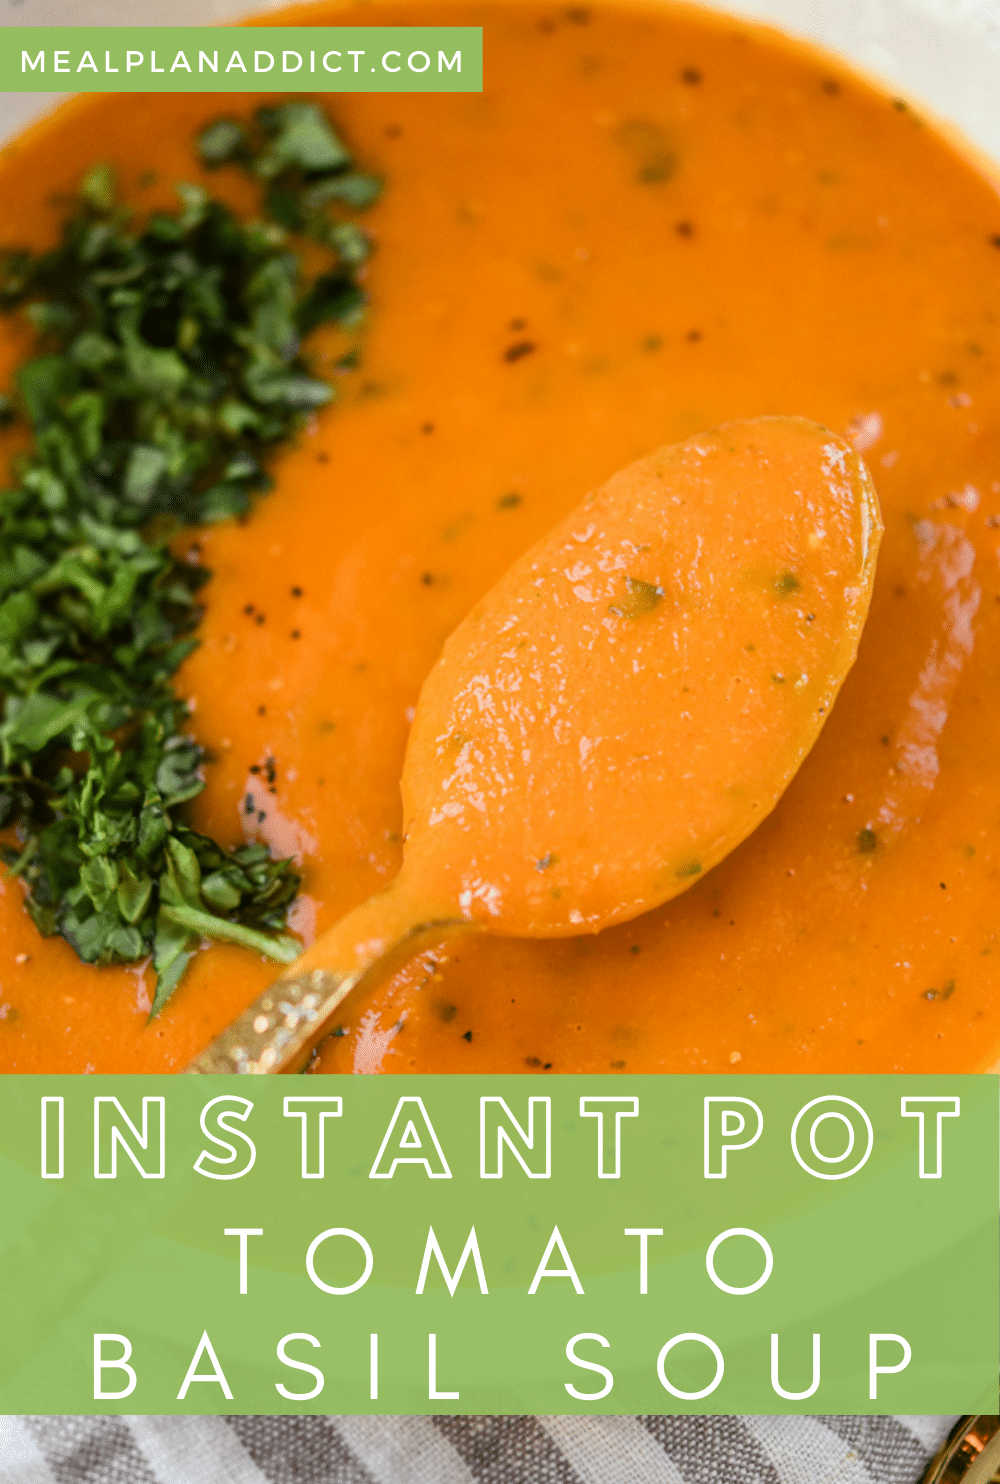 How to Make Instant Pot Tomato Basil Soup | Meal Plan Addict